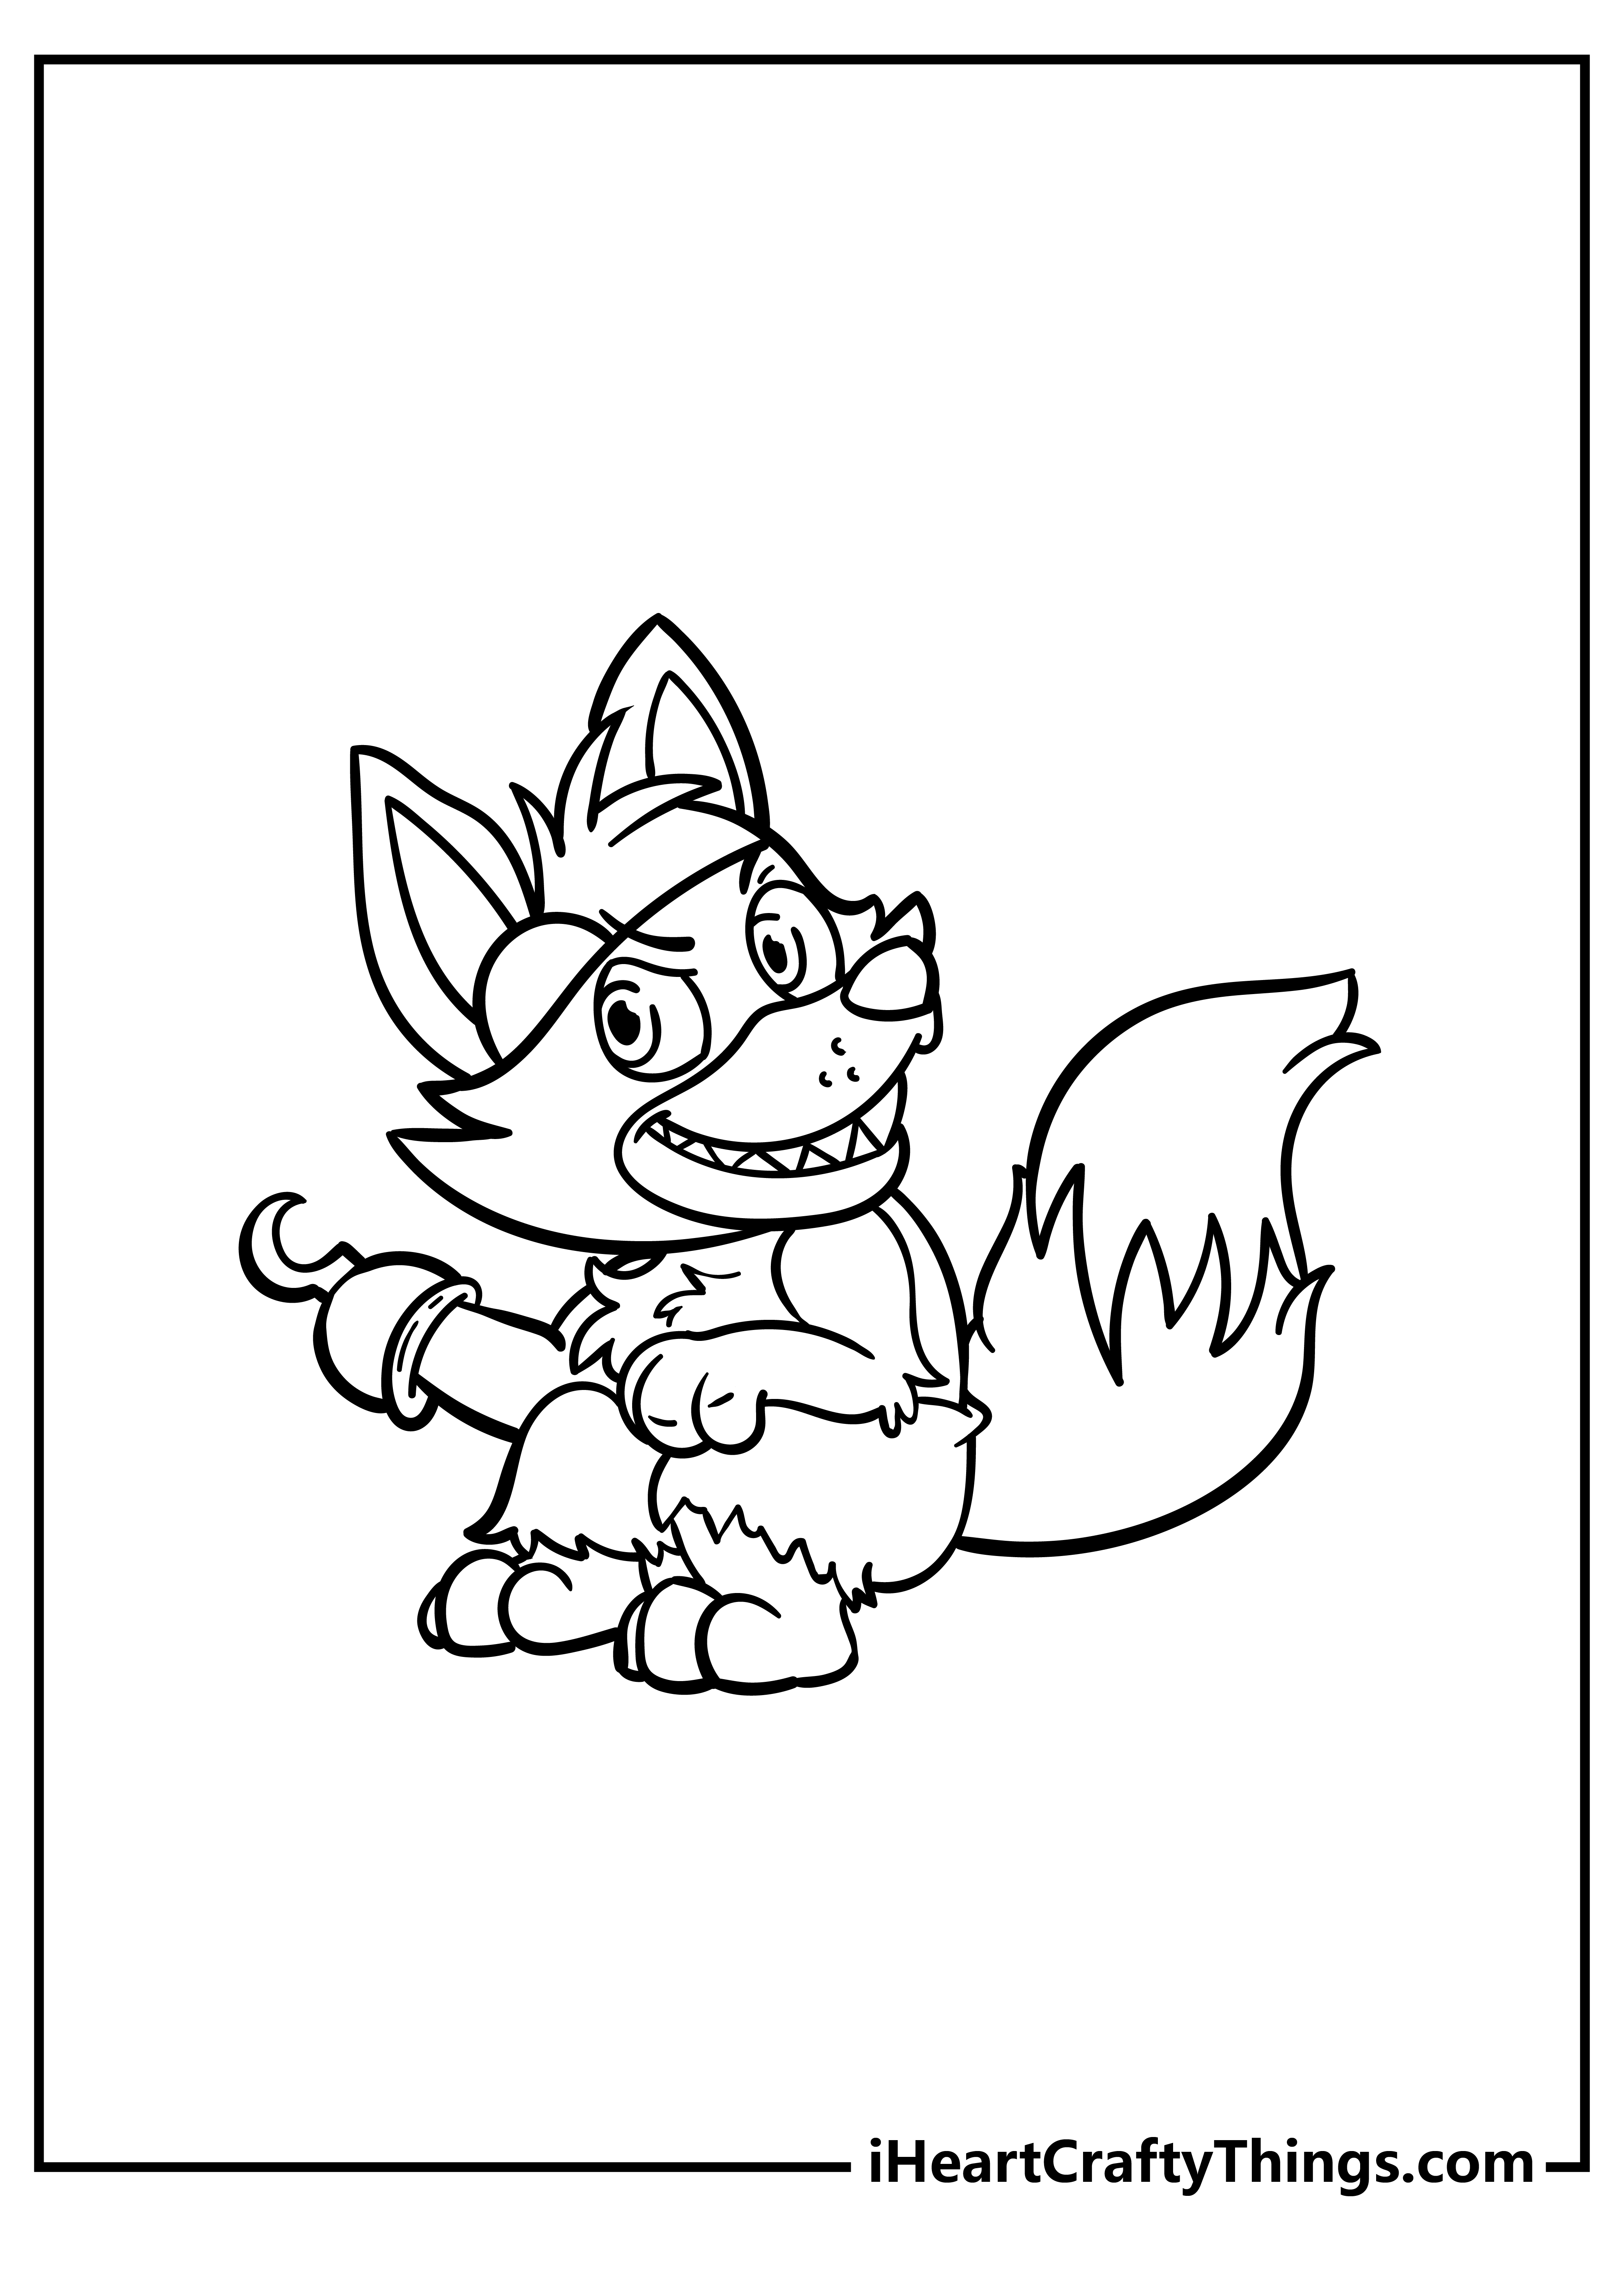 Five Nights At Freddy's Coloring Pages (Free Printables)